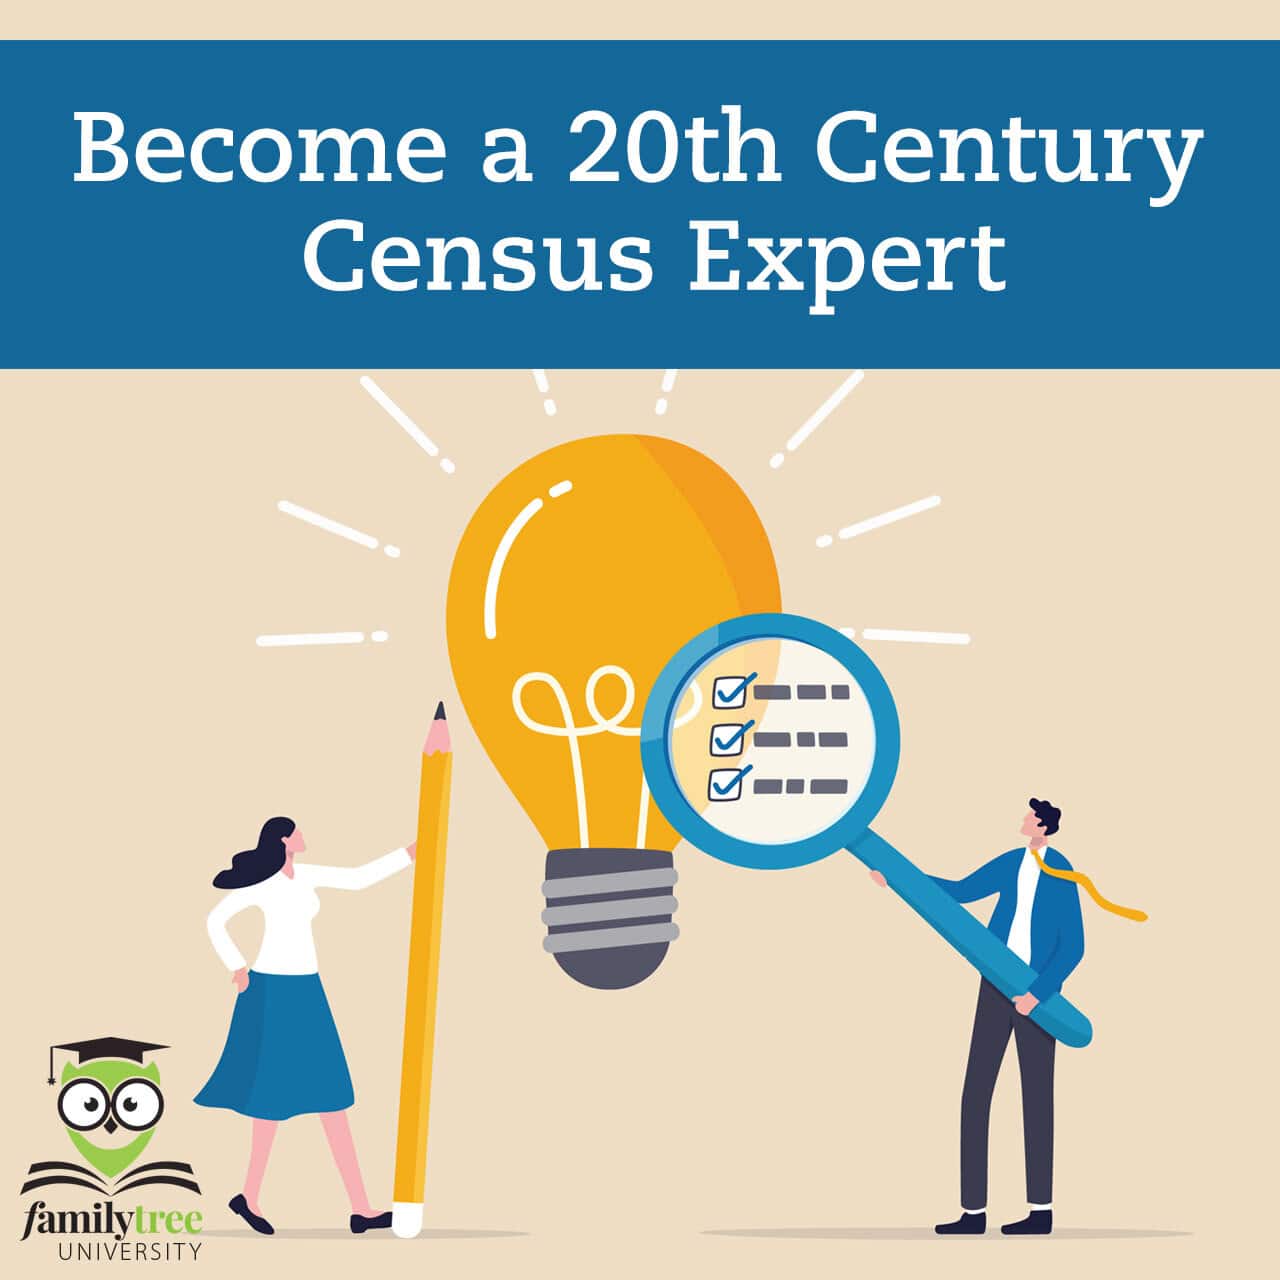 Become a 20th Century Census Expert